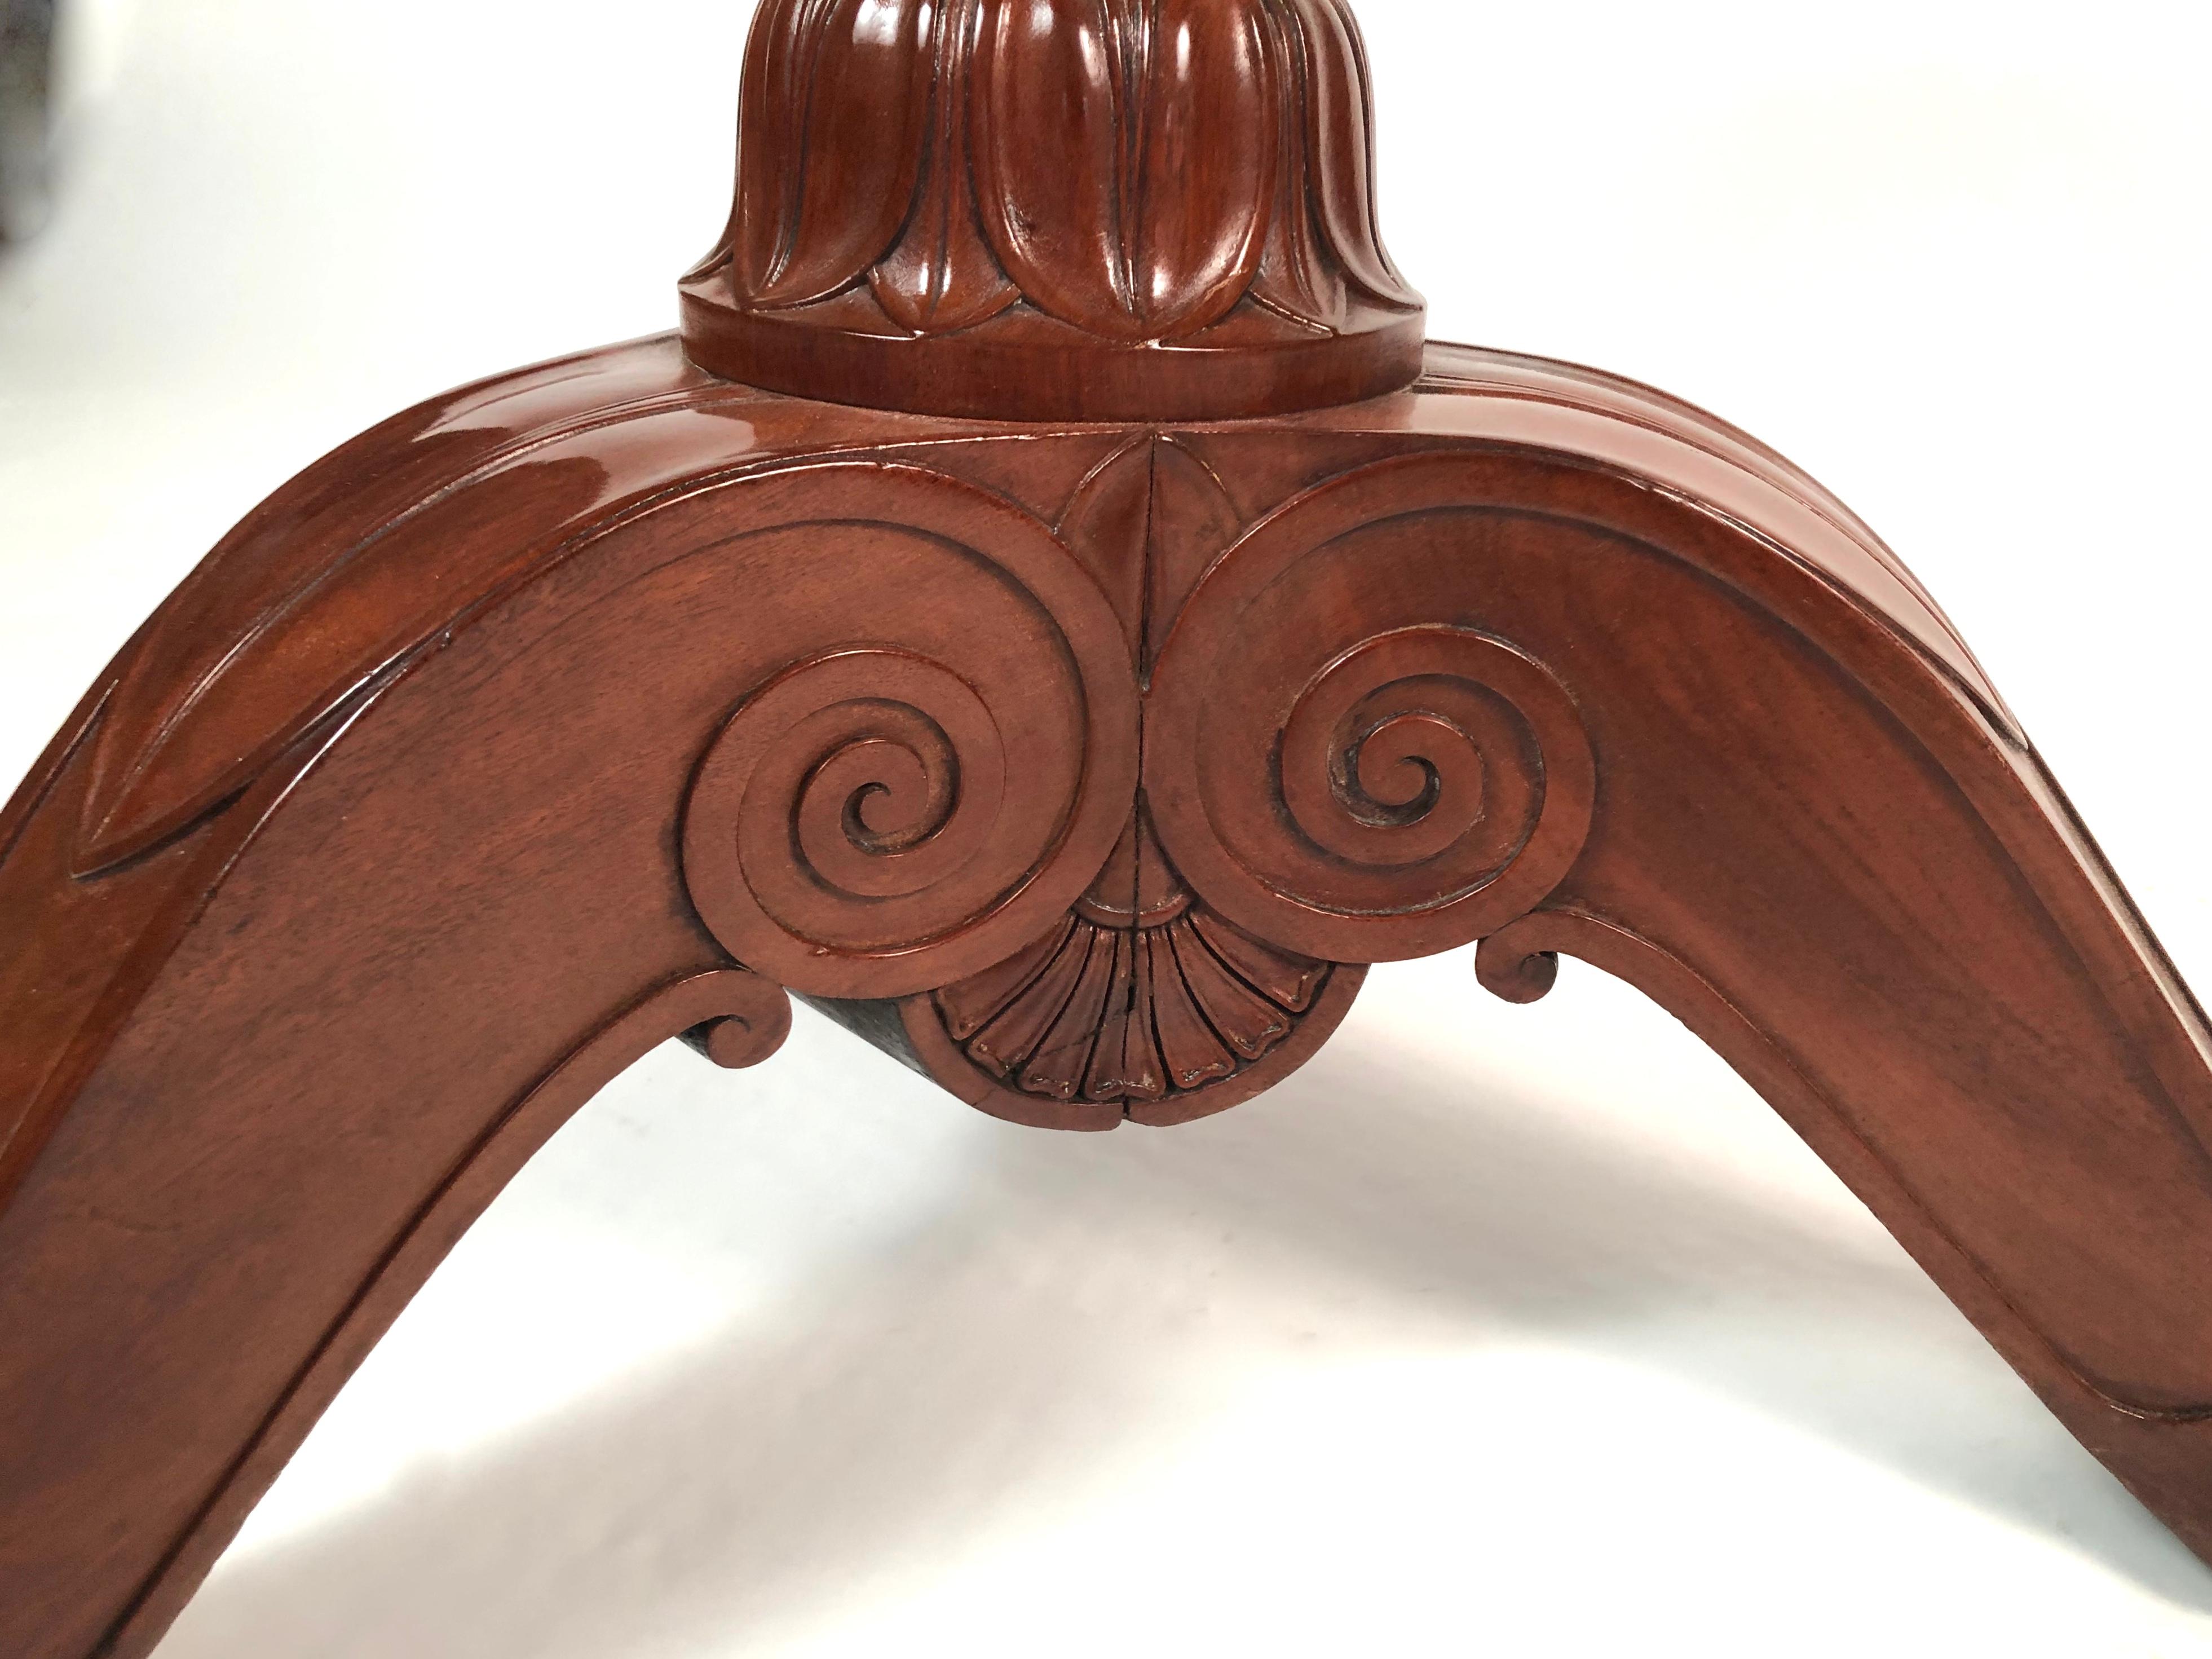 Early 19th Century French Empire Period Center Table in Mahogany with Stone Top by Jacob